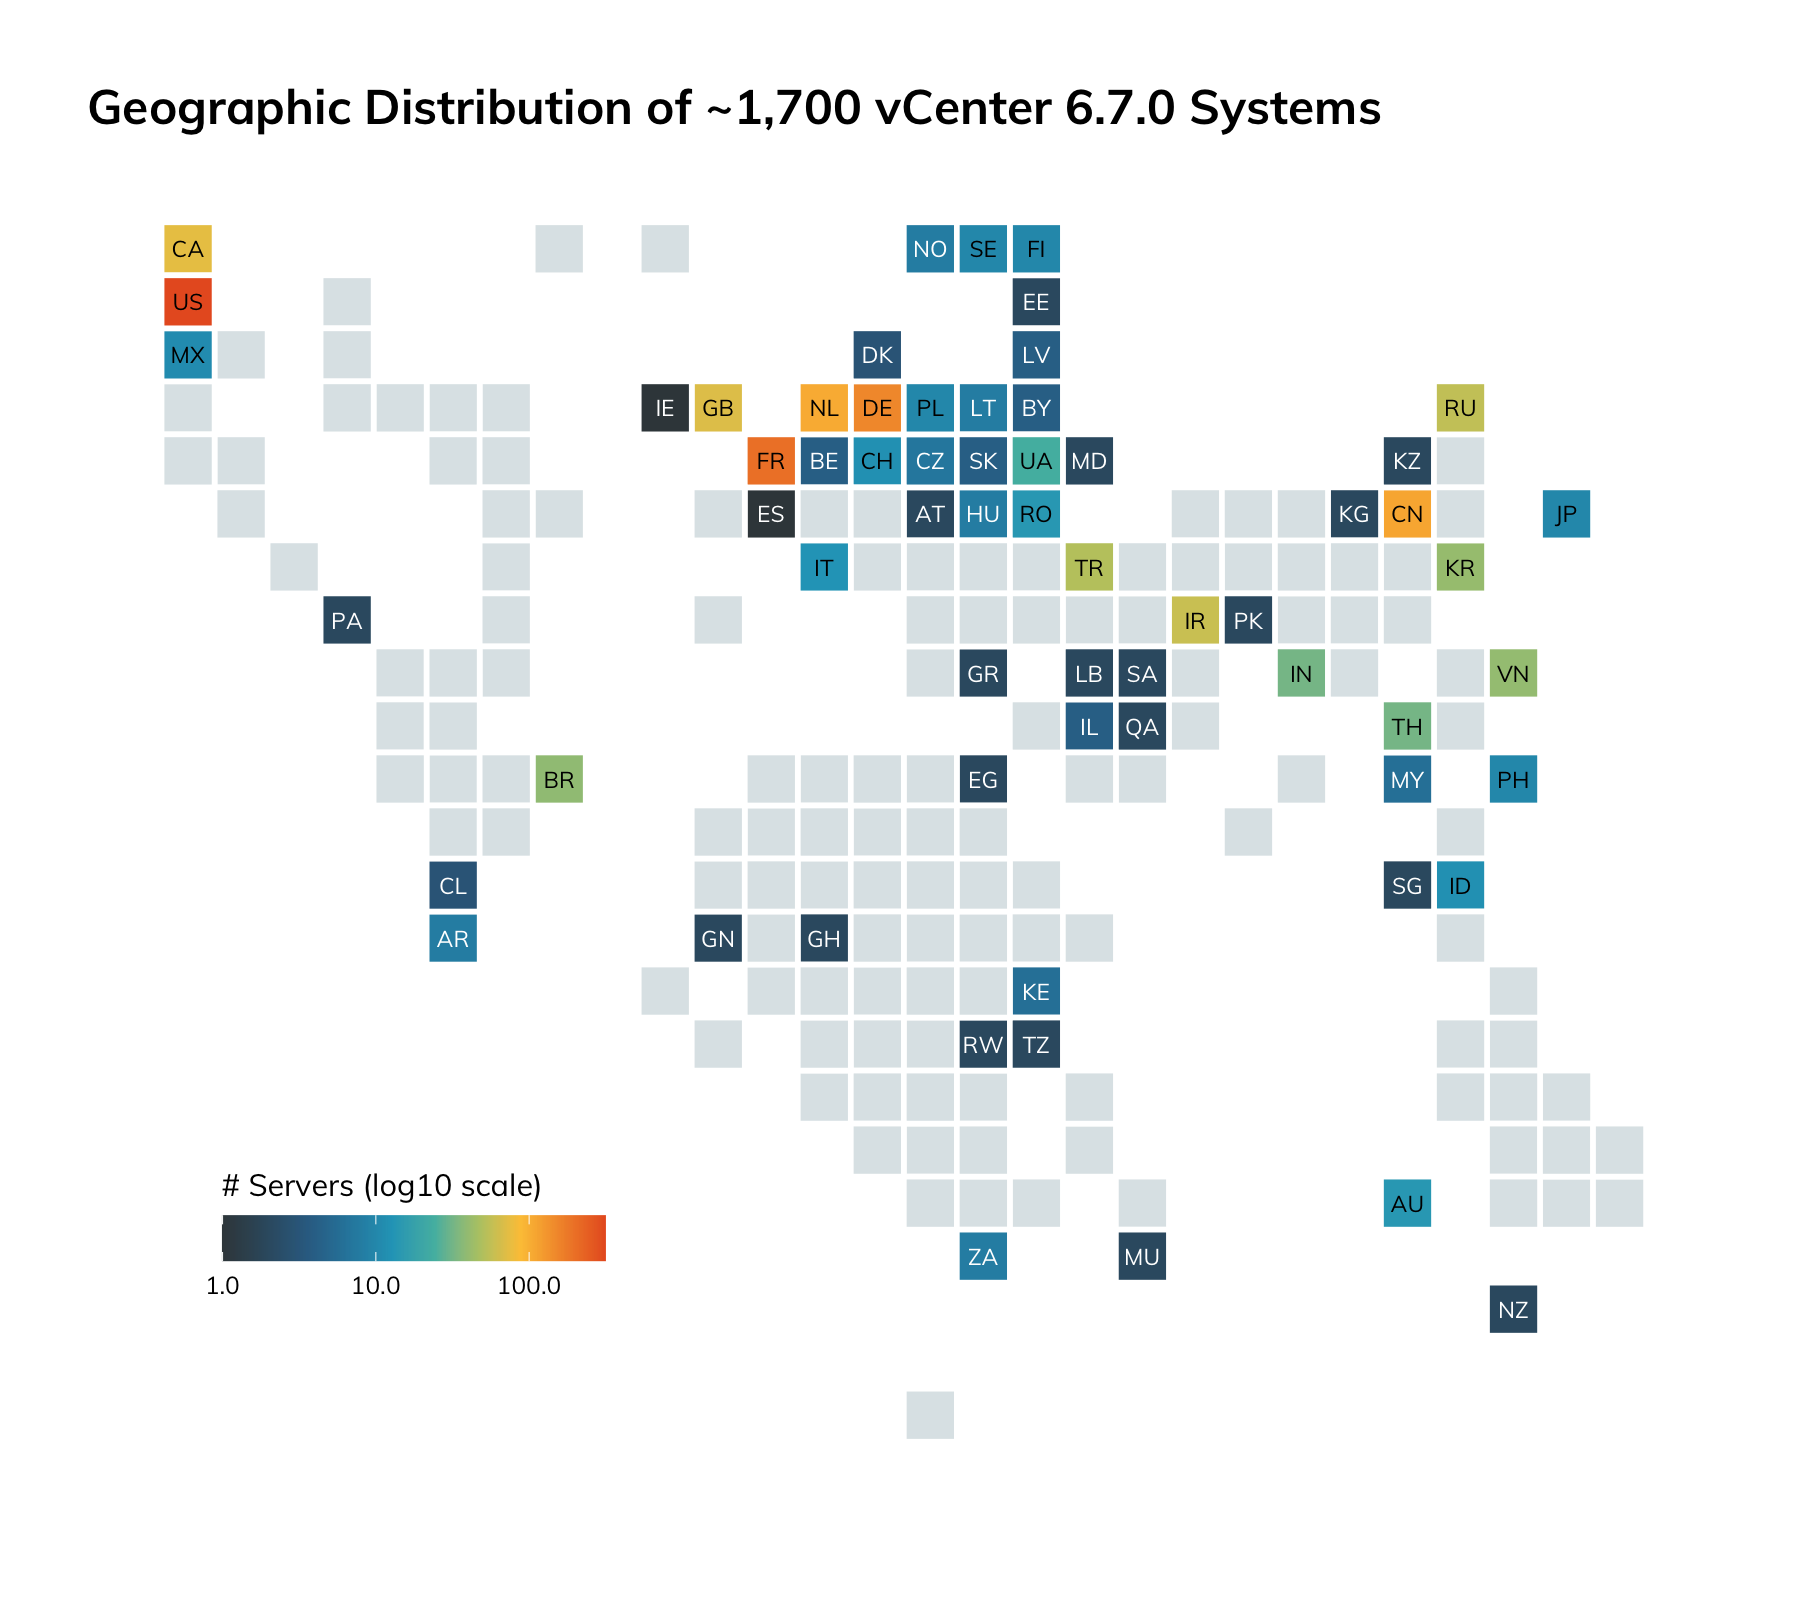 Figure 2: Geographic Distribution of ~1,700 vCenter 6.7.0 Systems